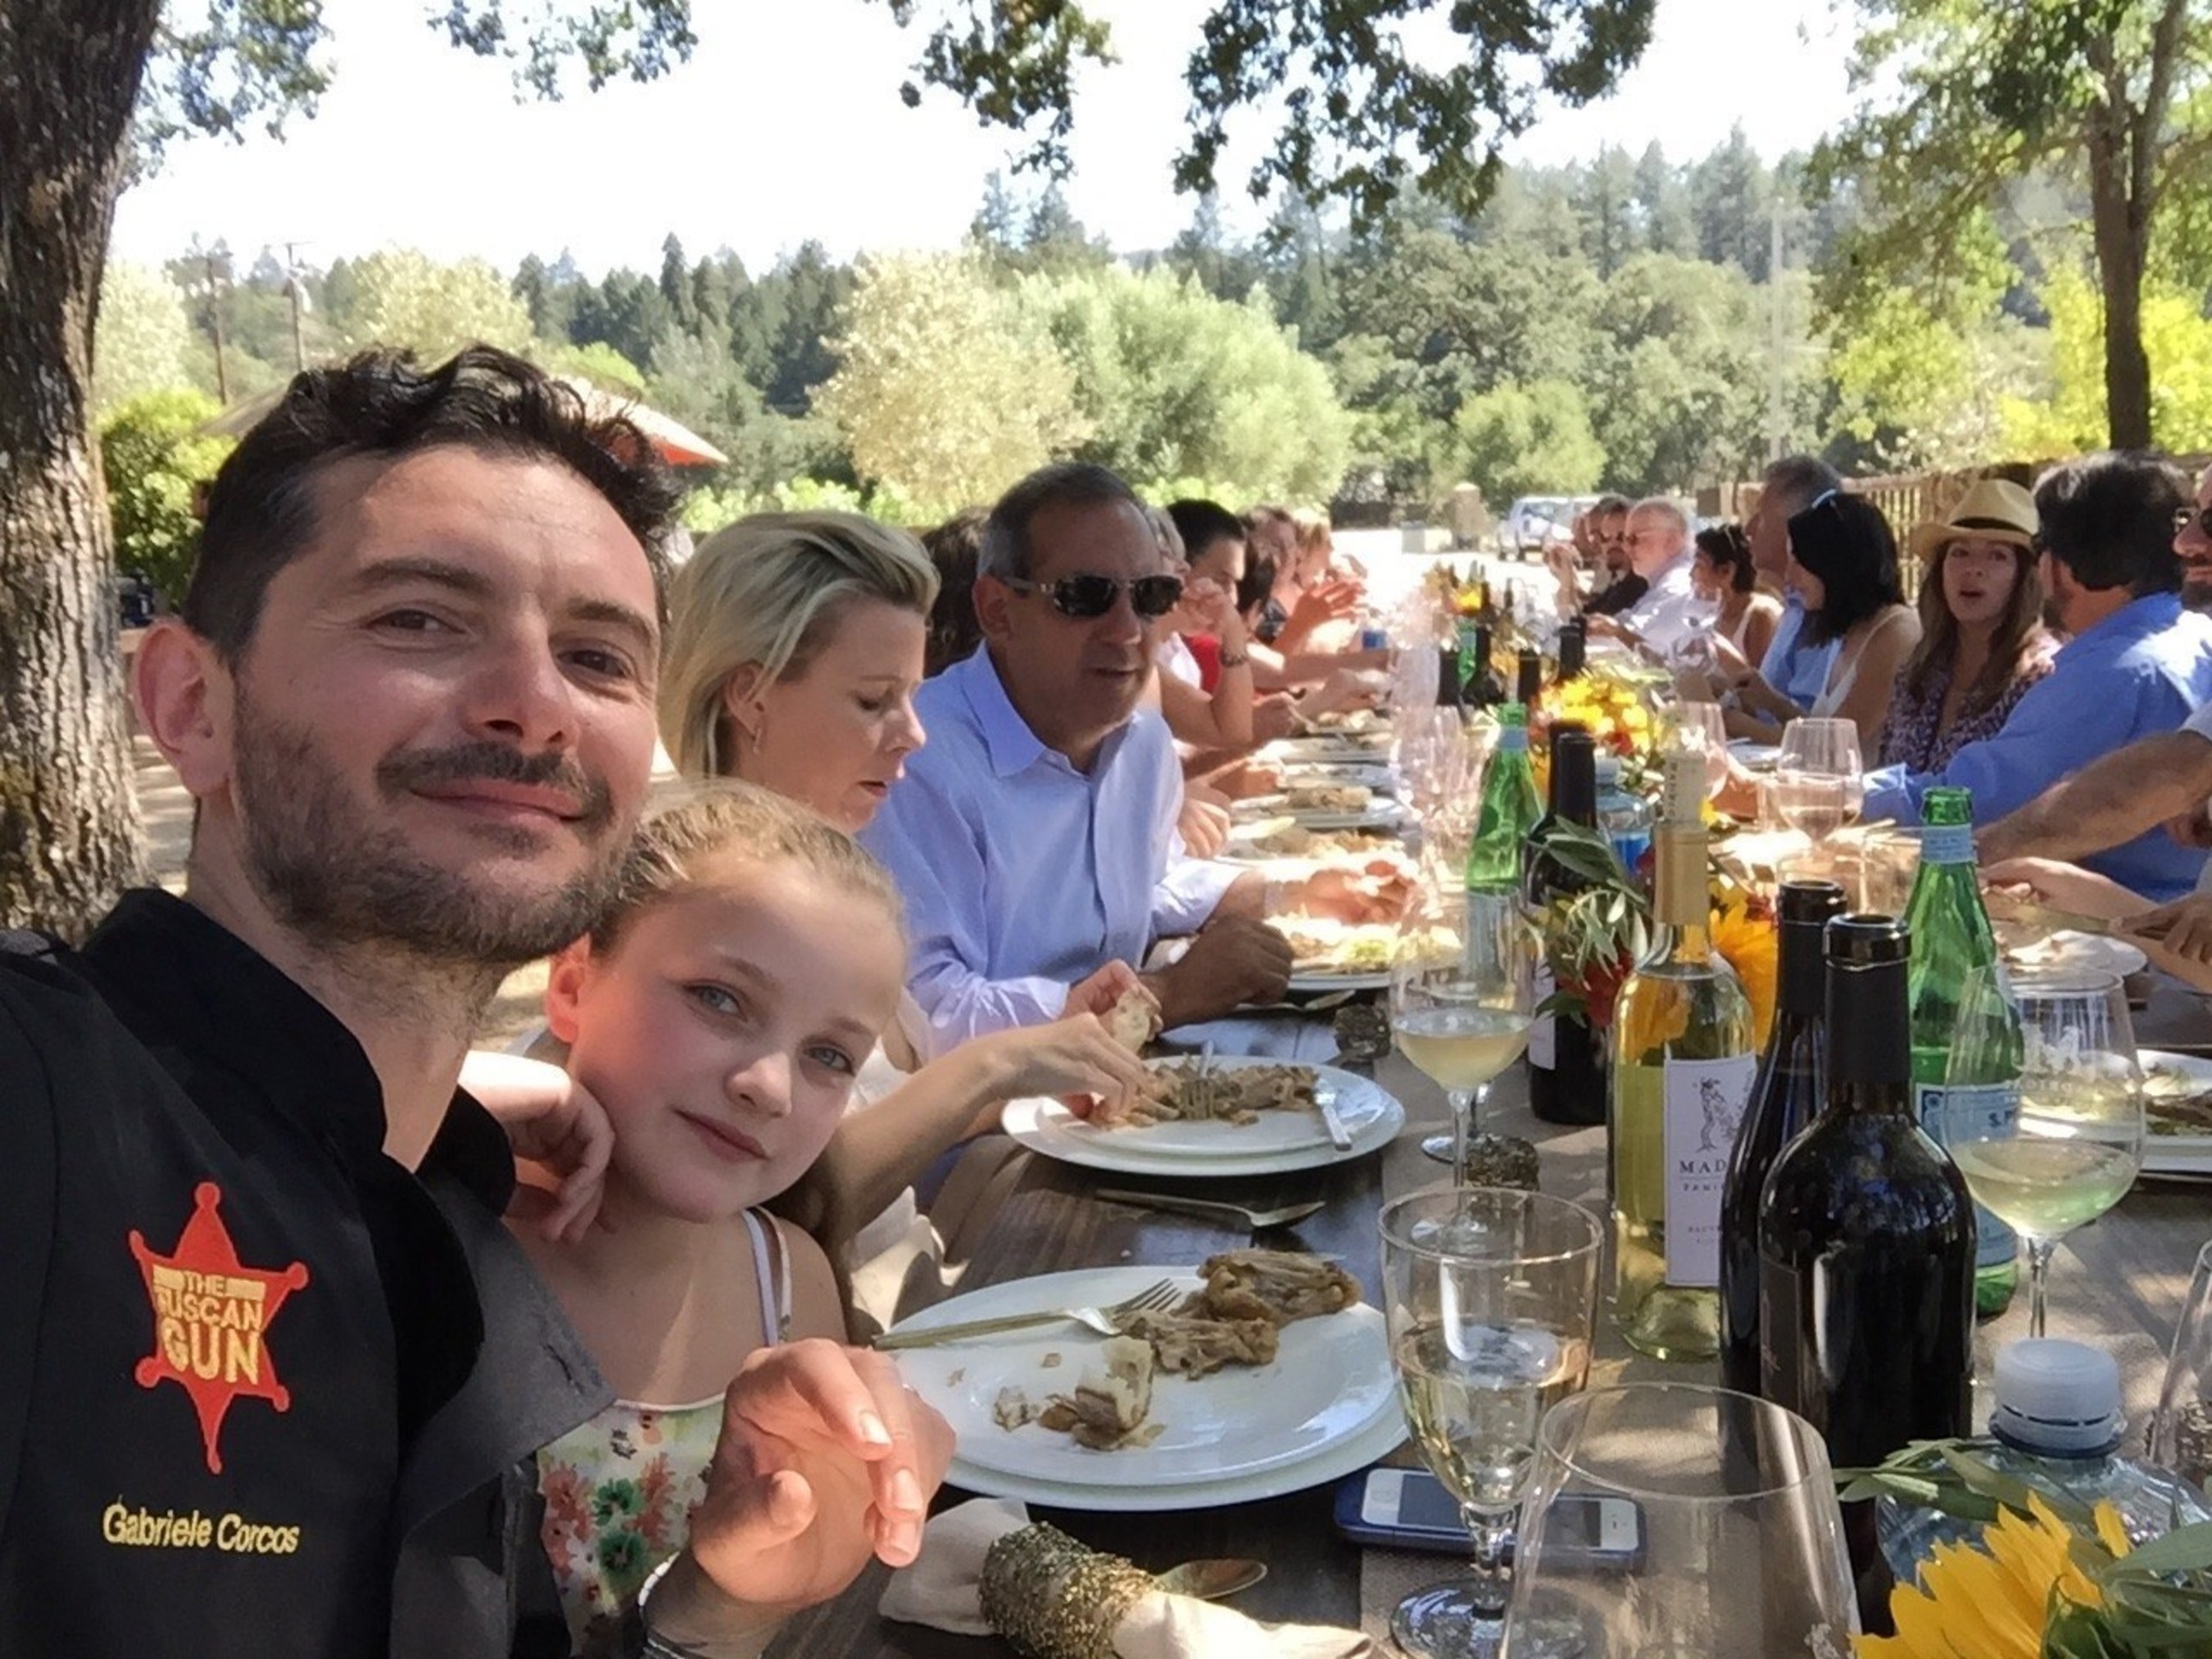 Gabriele Corcos of Cooking Channel's Extra Virgin enjoys Madrigal Family Winery Sauvignon Blanc with owner Chris Madrigal at Madrigal Family Winery in Calistoga